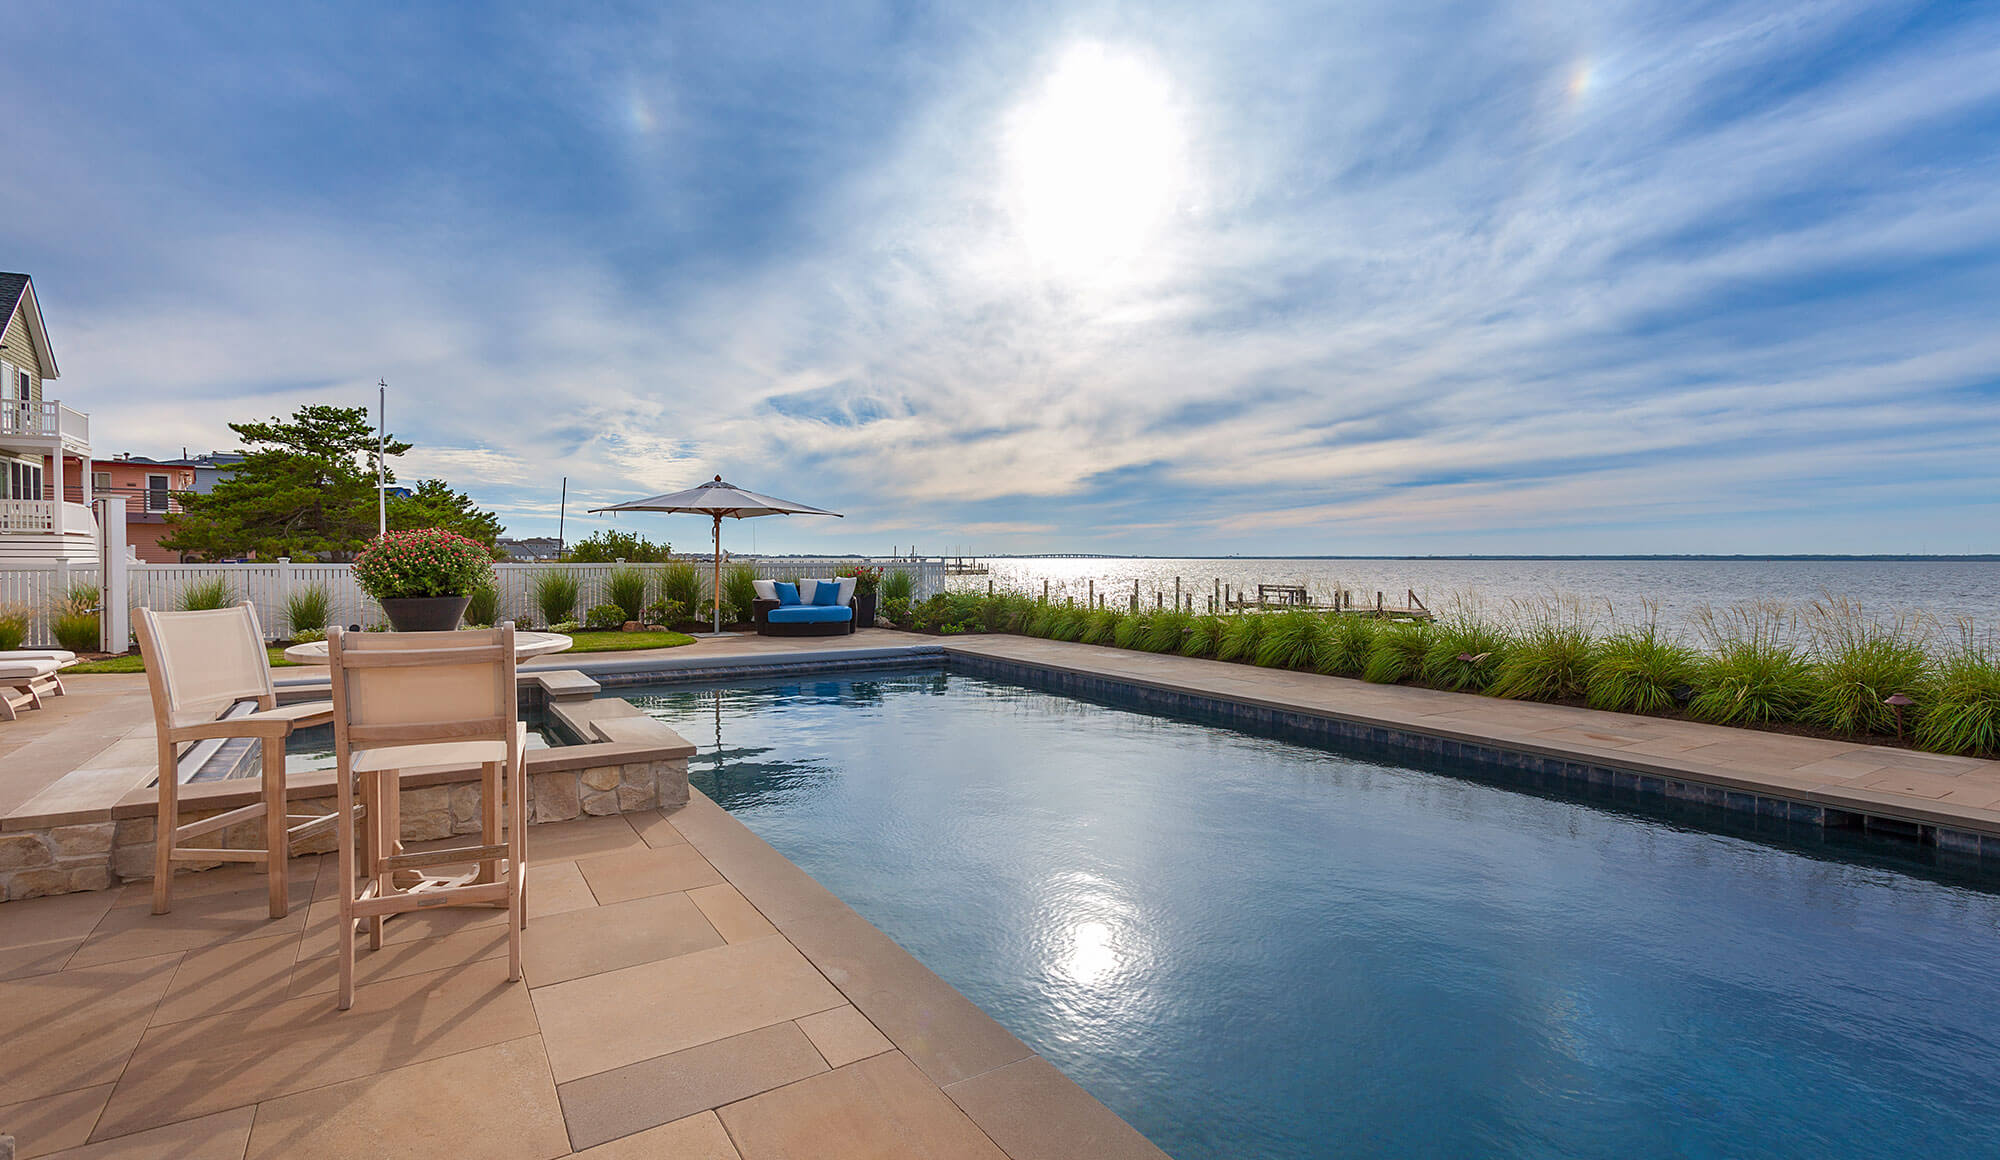 Pool Hardscaping Design by Bay Ave Plant Company on LBI